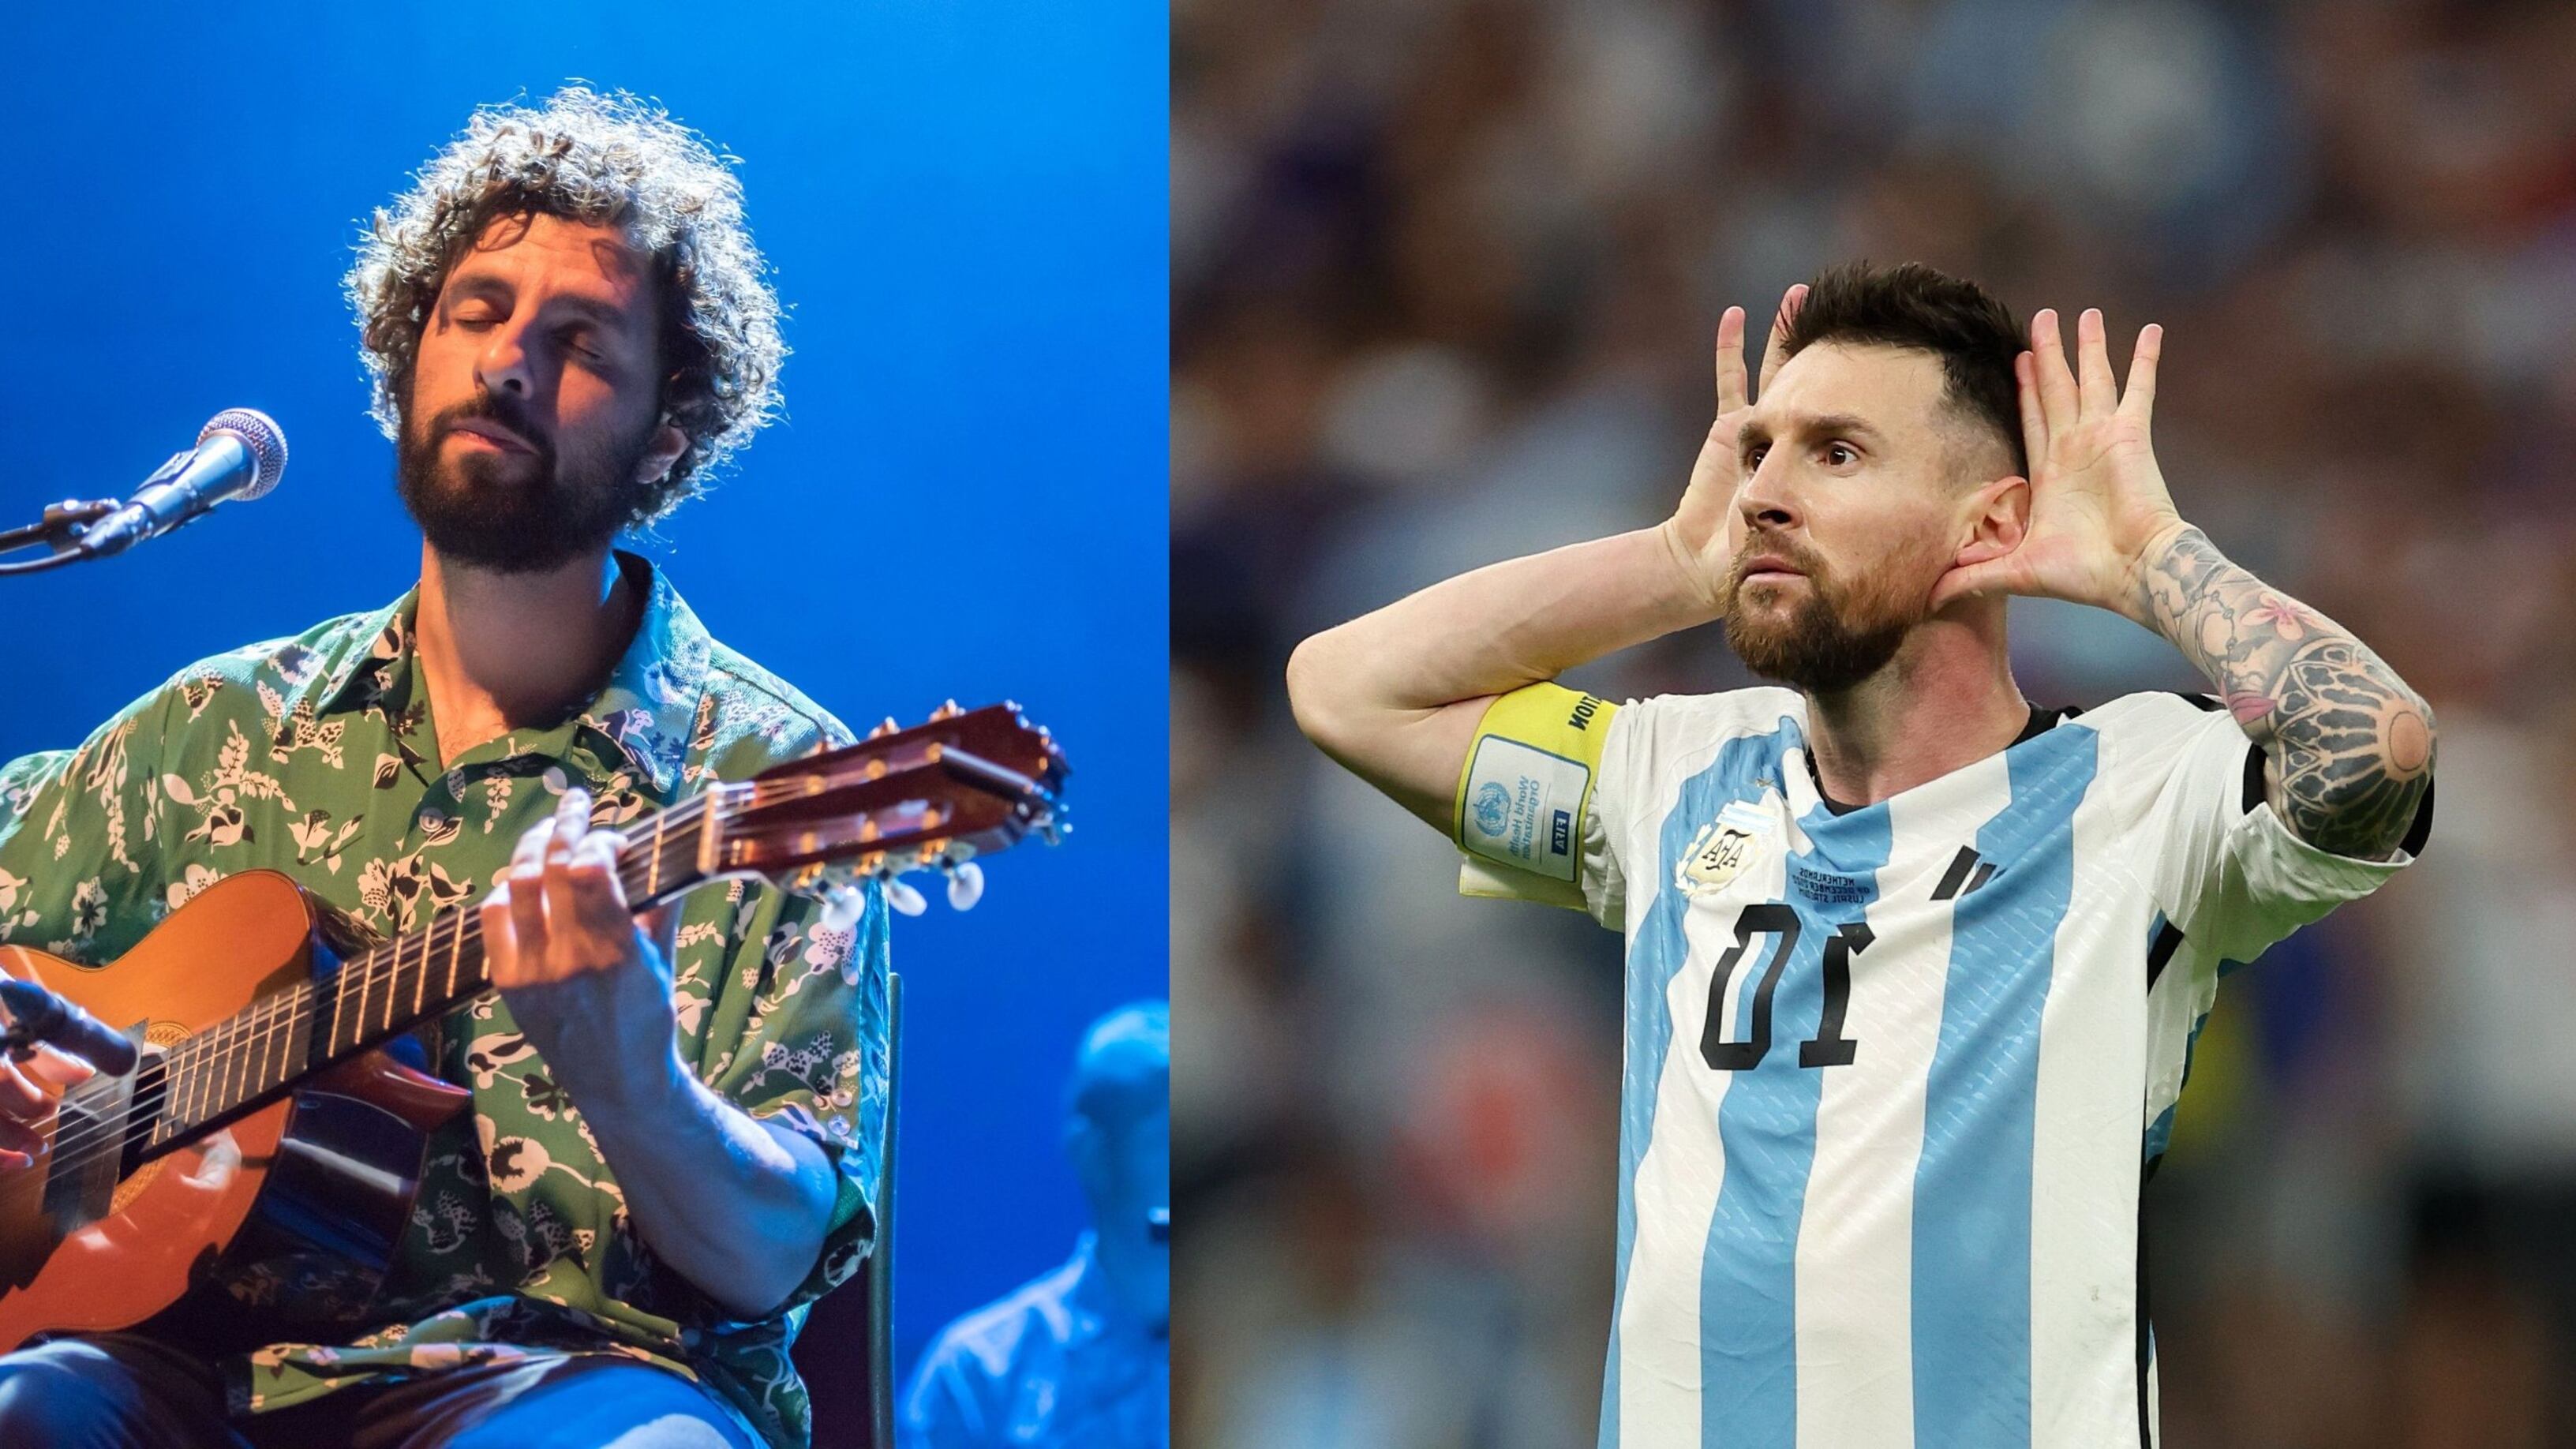 They said he had more talent than Lionel Messi, now he makes a living as a singer